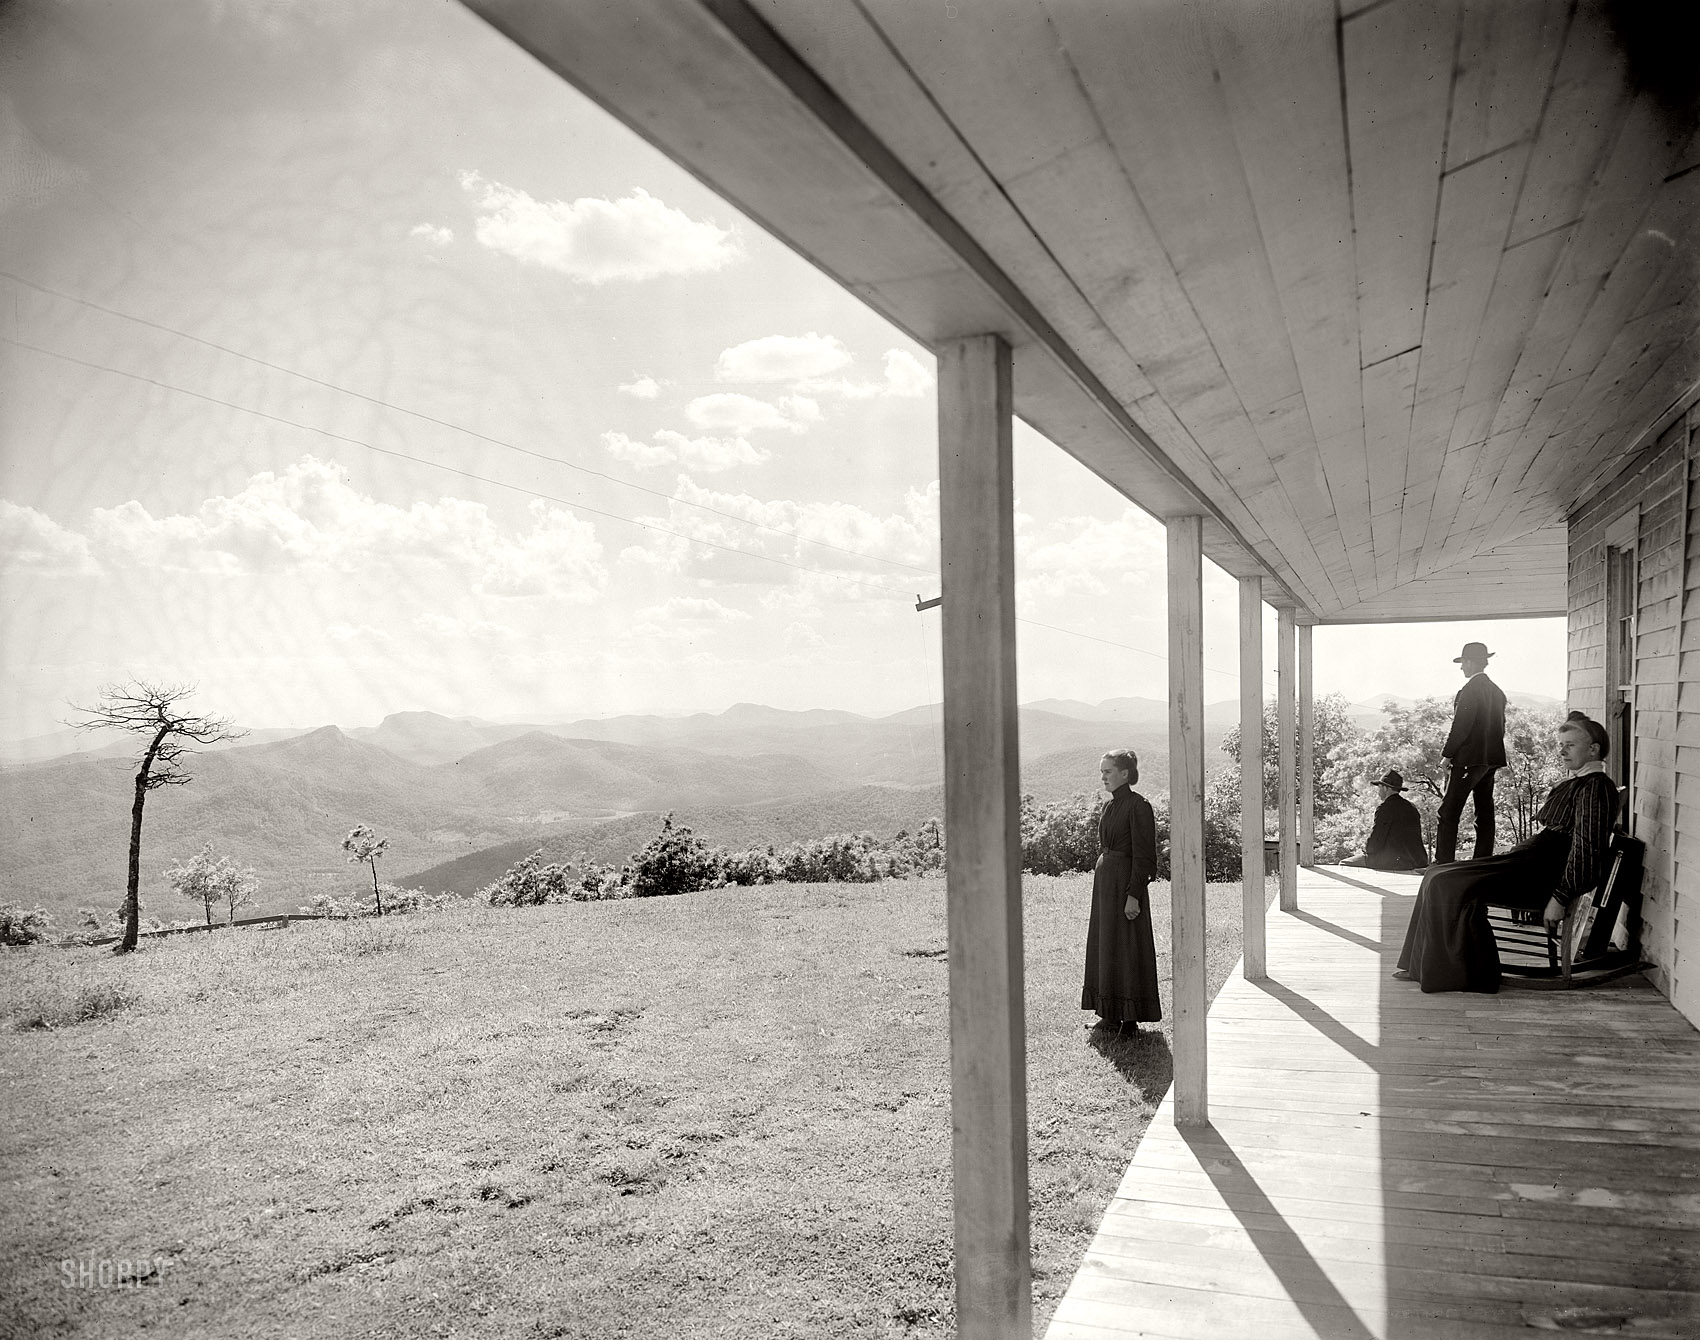 Sapphire, North Carolina, circa 1902. "View from the Lodge on Mount Toxaway." Glass negative by William Henry Jackson, Detroit Publishing Co. View full size.